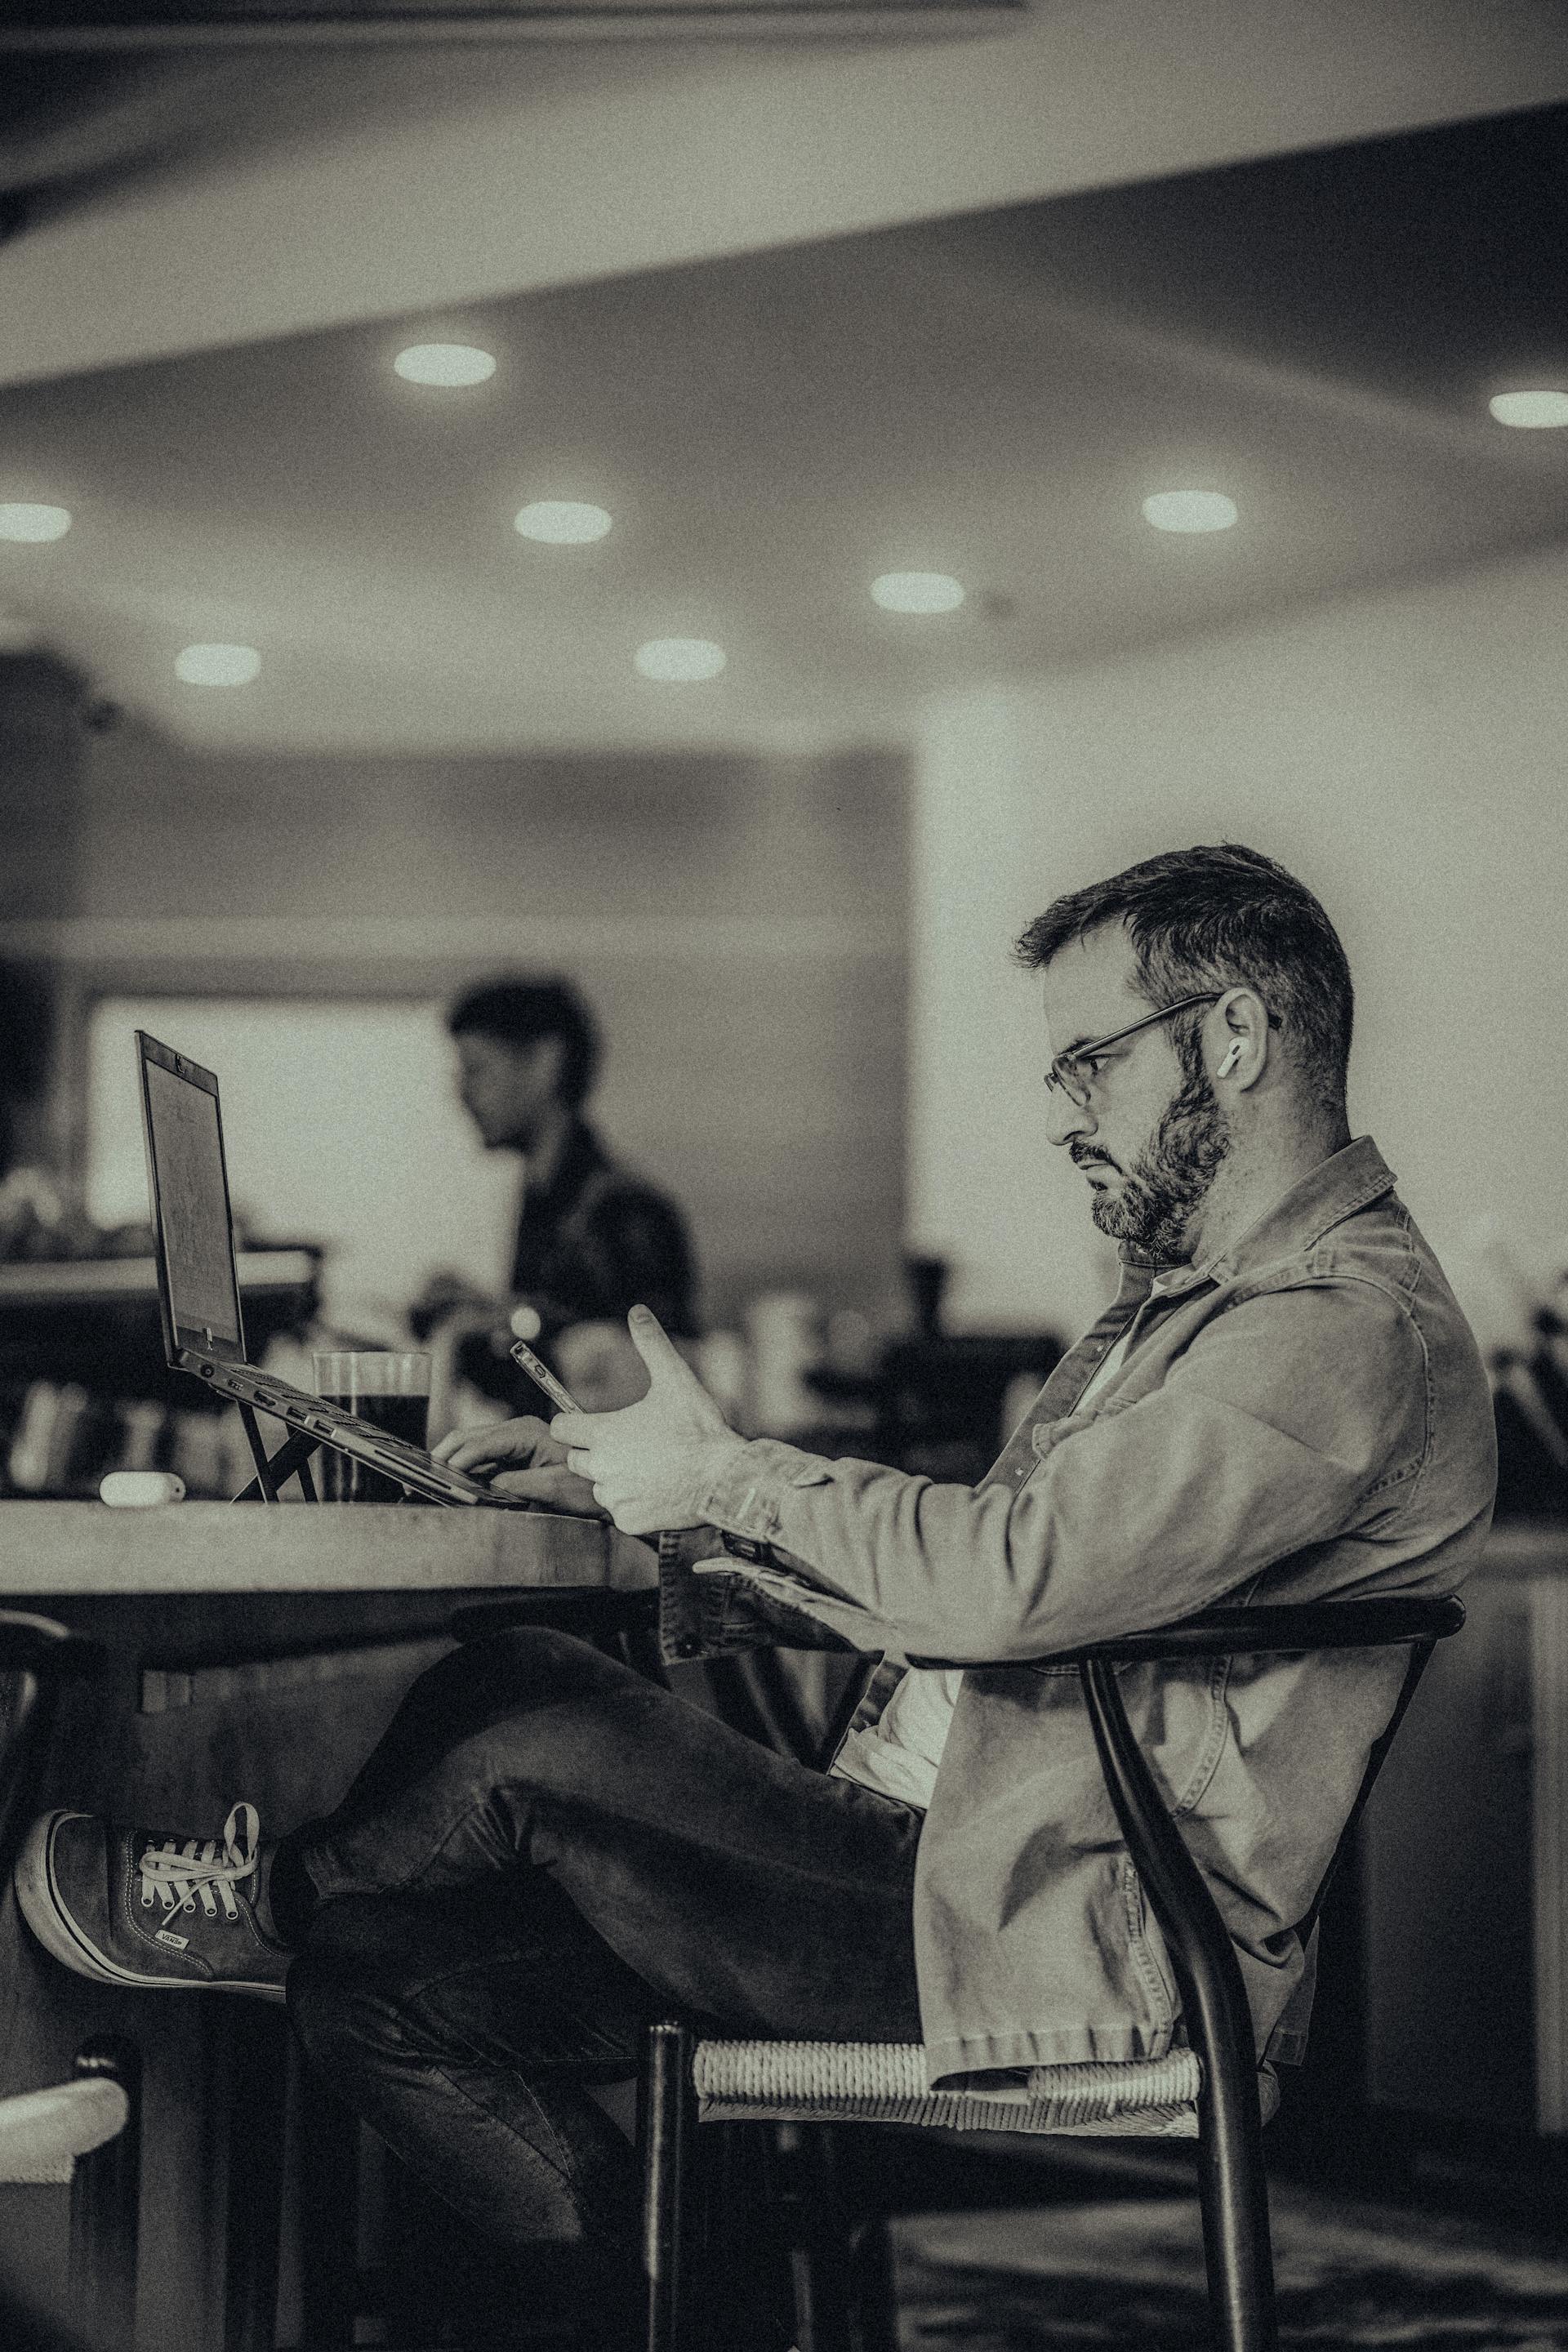 A man sitting in an office and using his phone | Source: Pexels